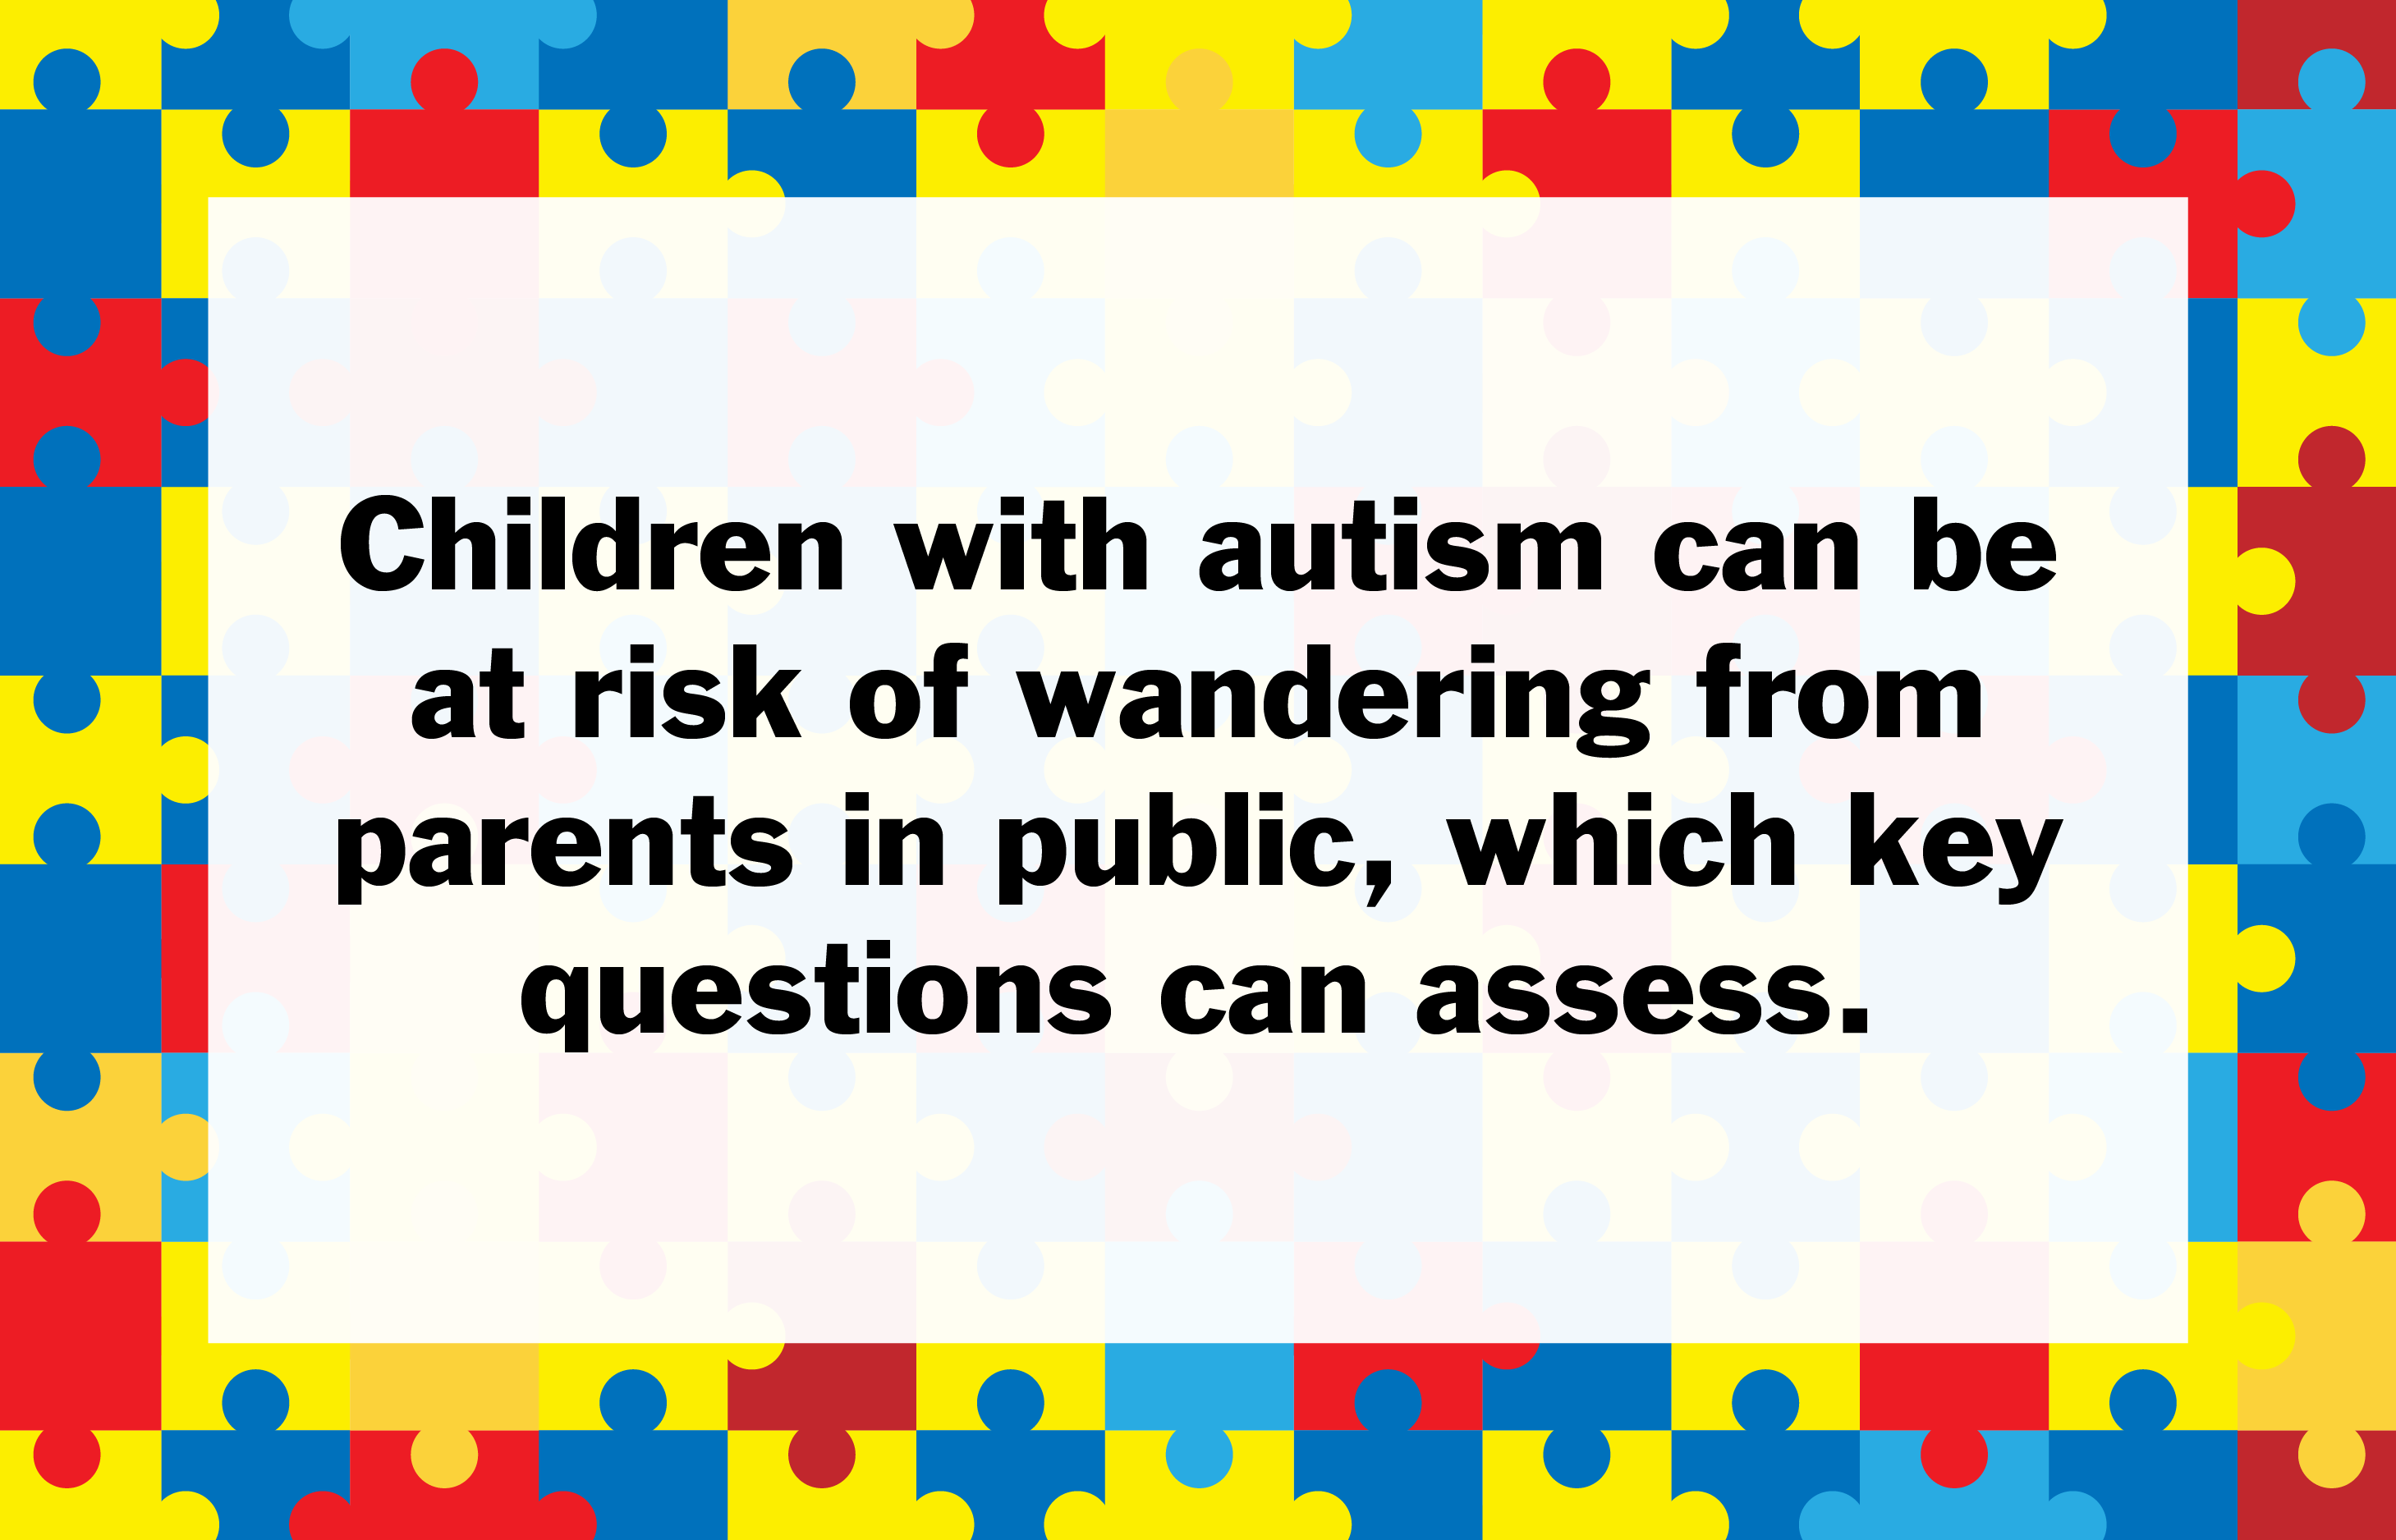 14 questions to assess safety skills in a child with autism